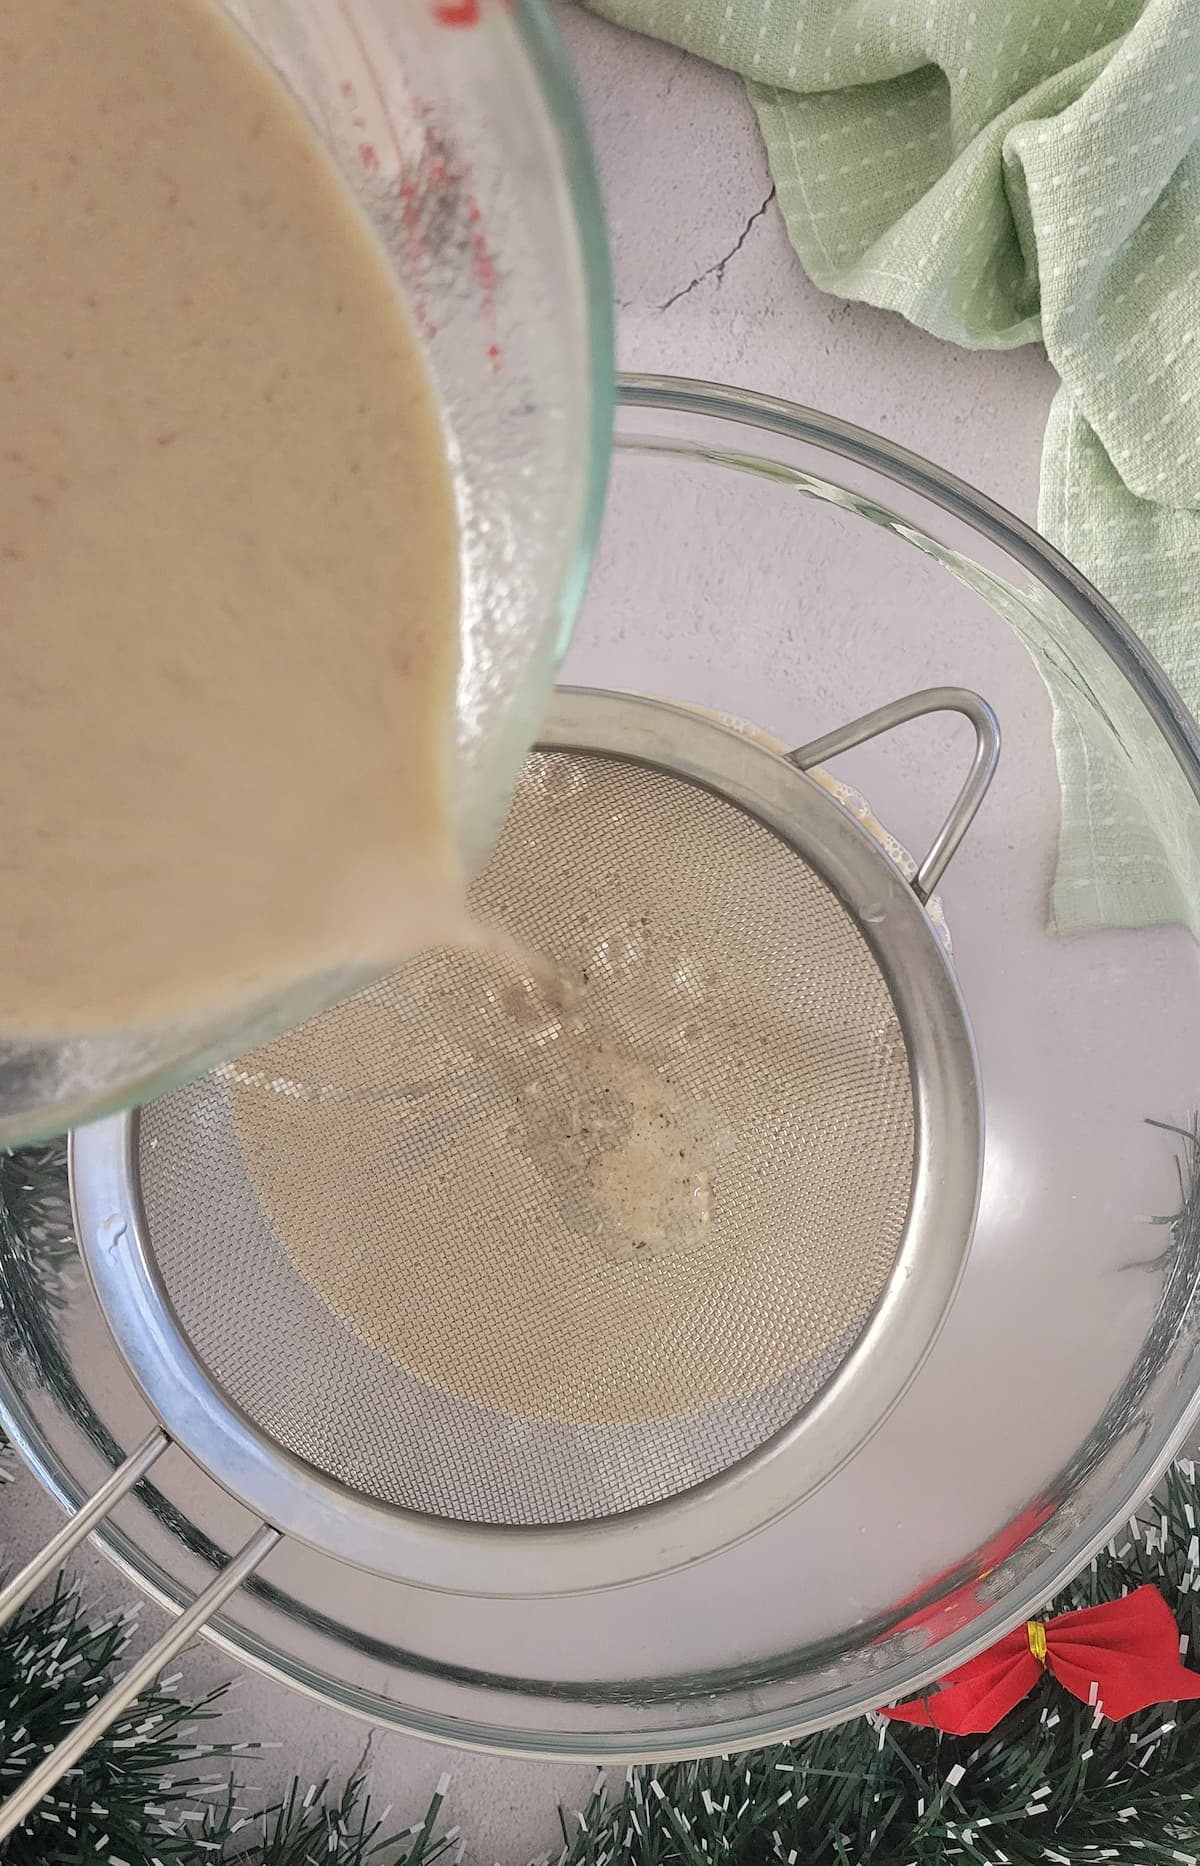 eggnog being poured into a fine mesh strainer over a bowl